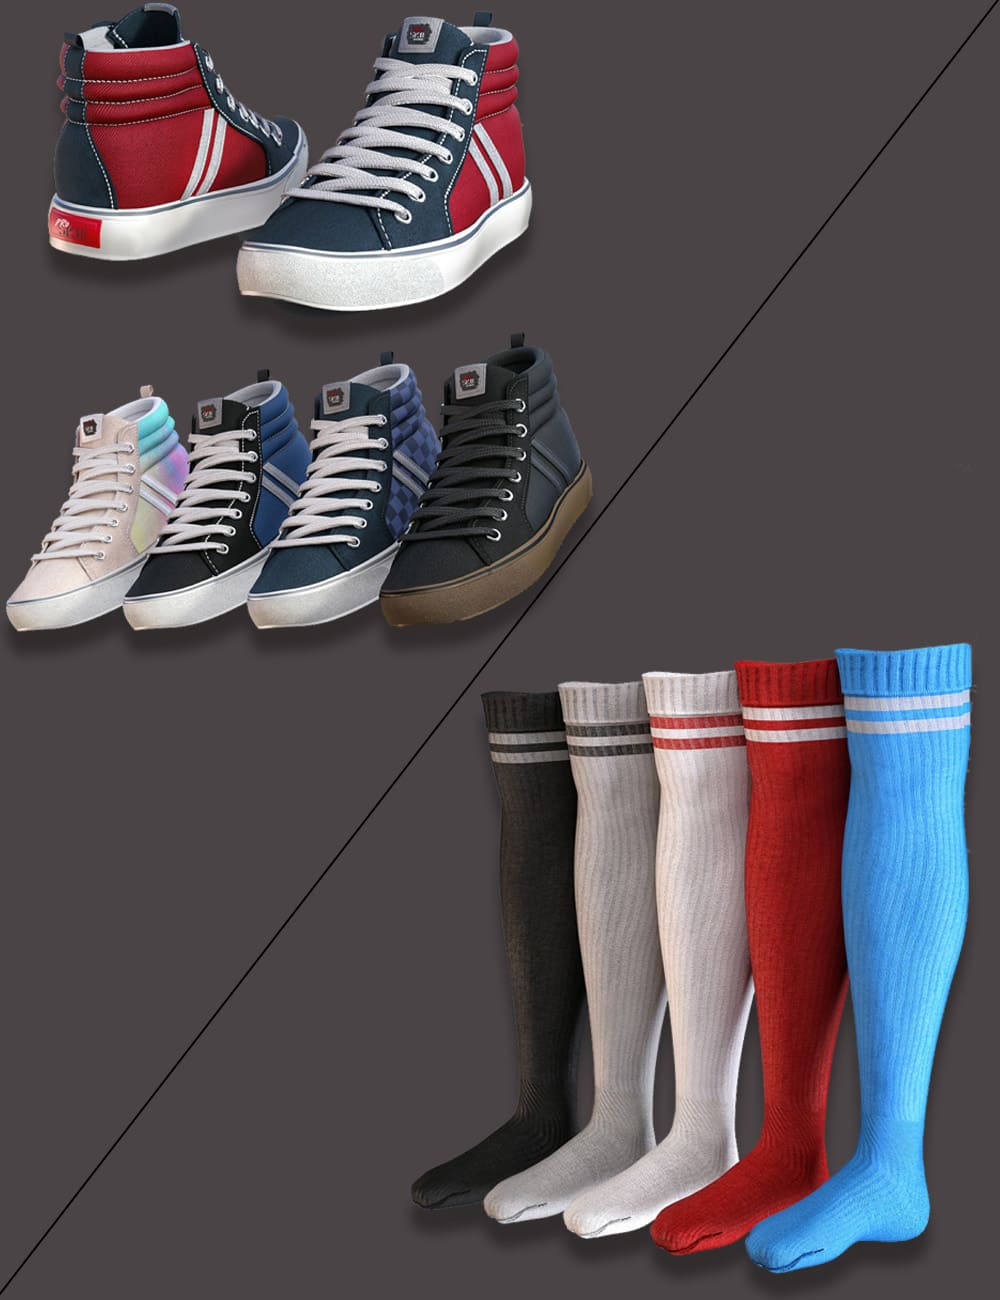 AJC Pro Skate Sneakers and Socks for Genesis 8 and 8.1 Females_DAZ3D下载站